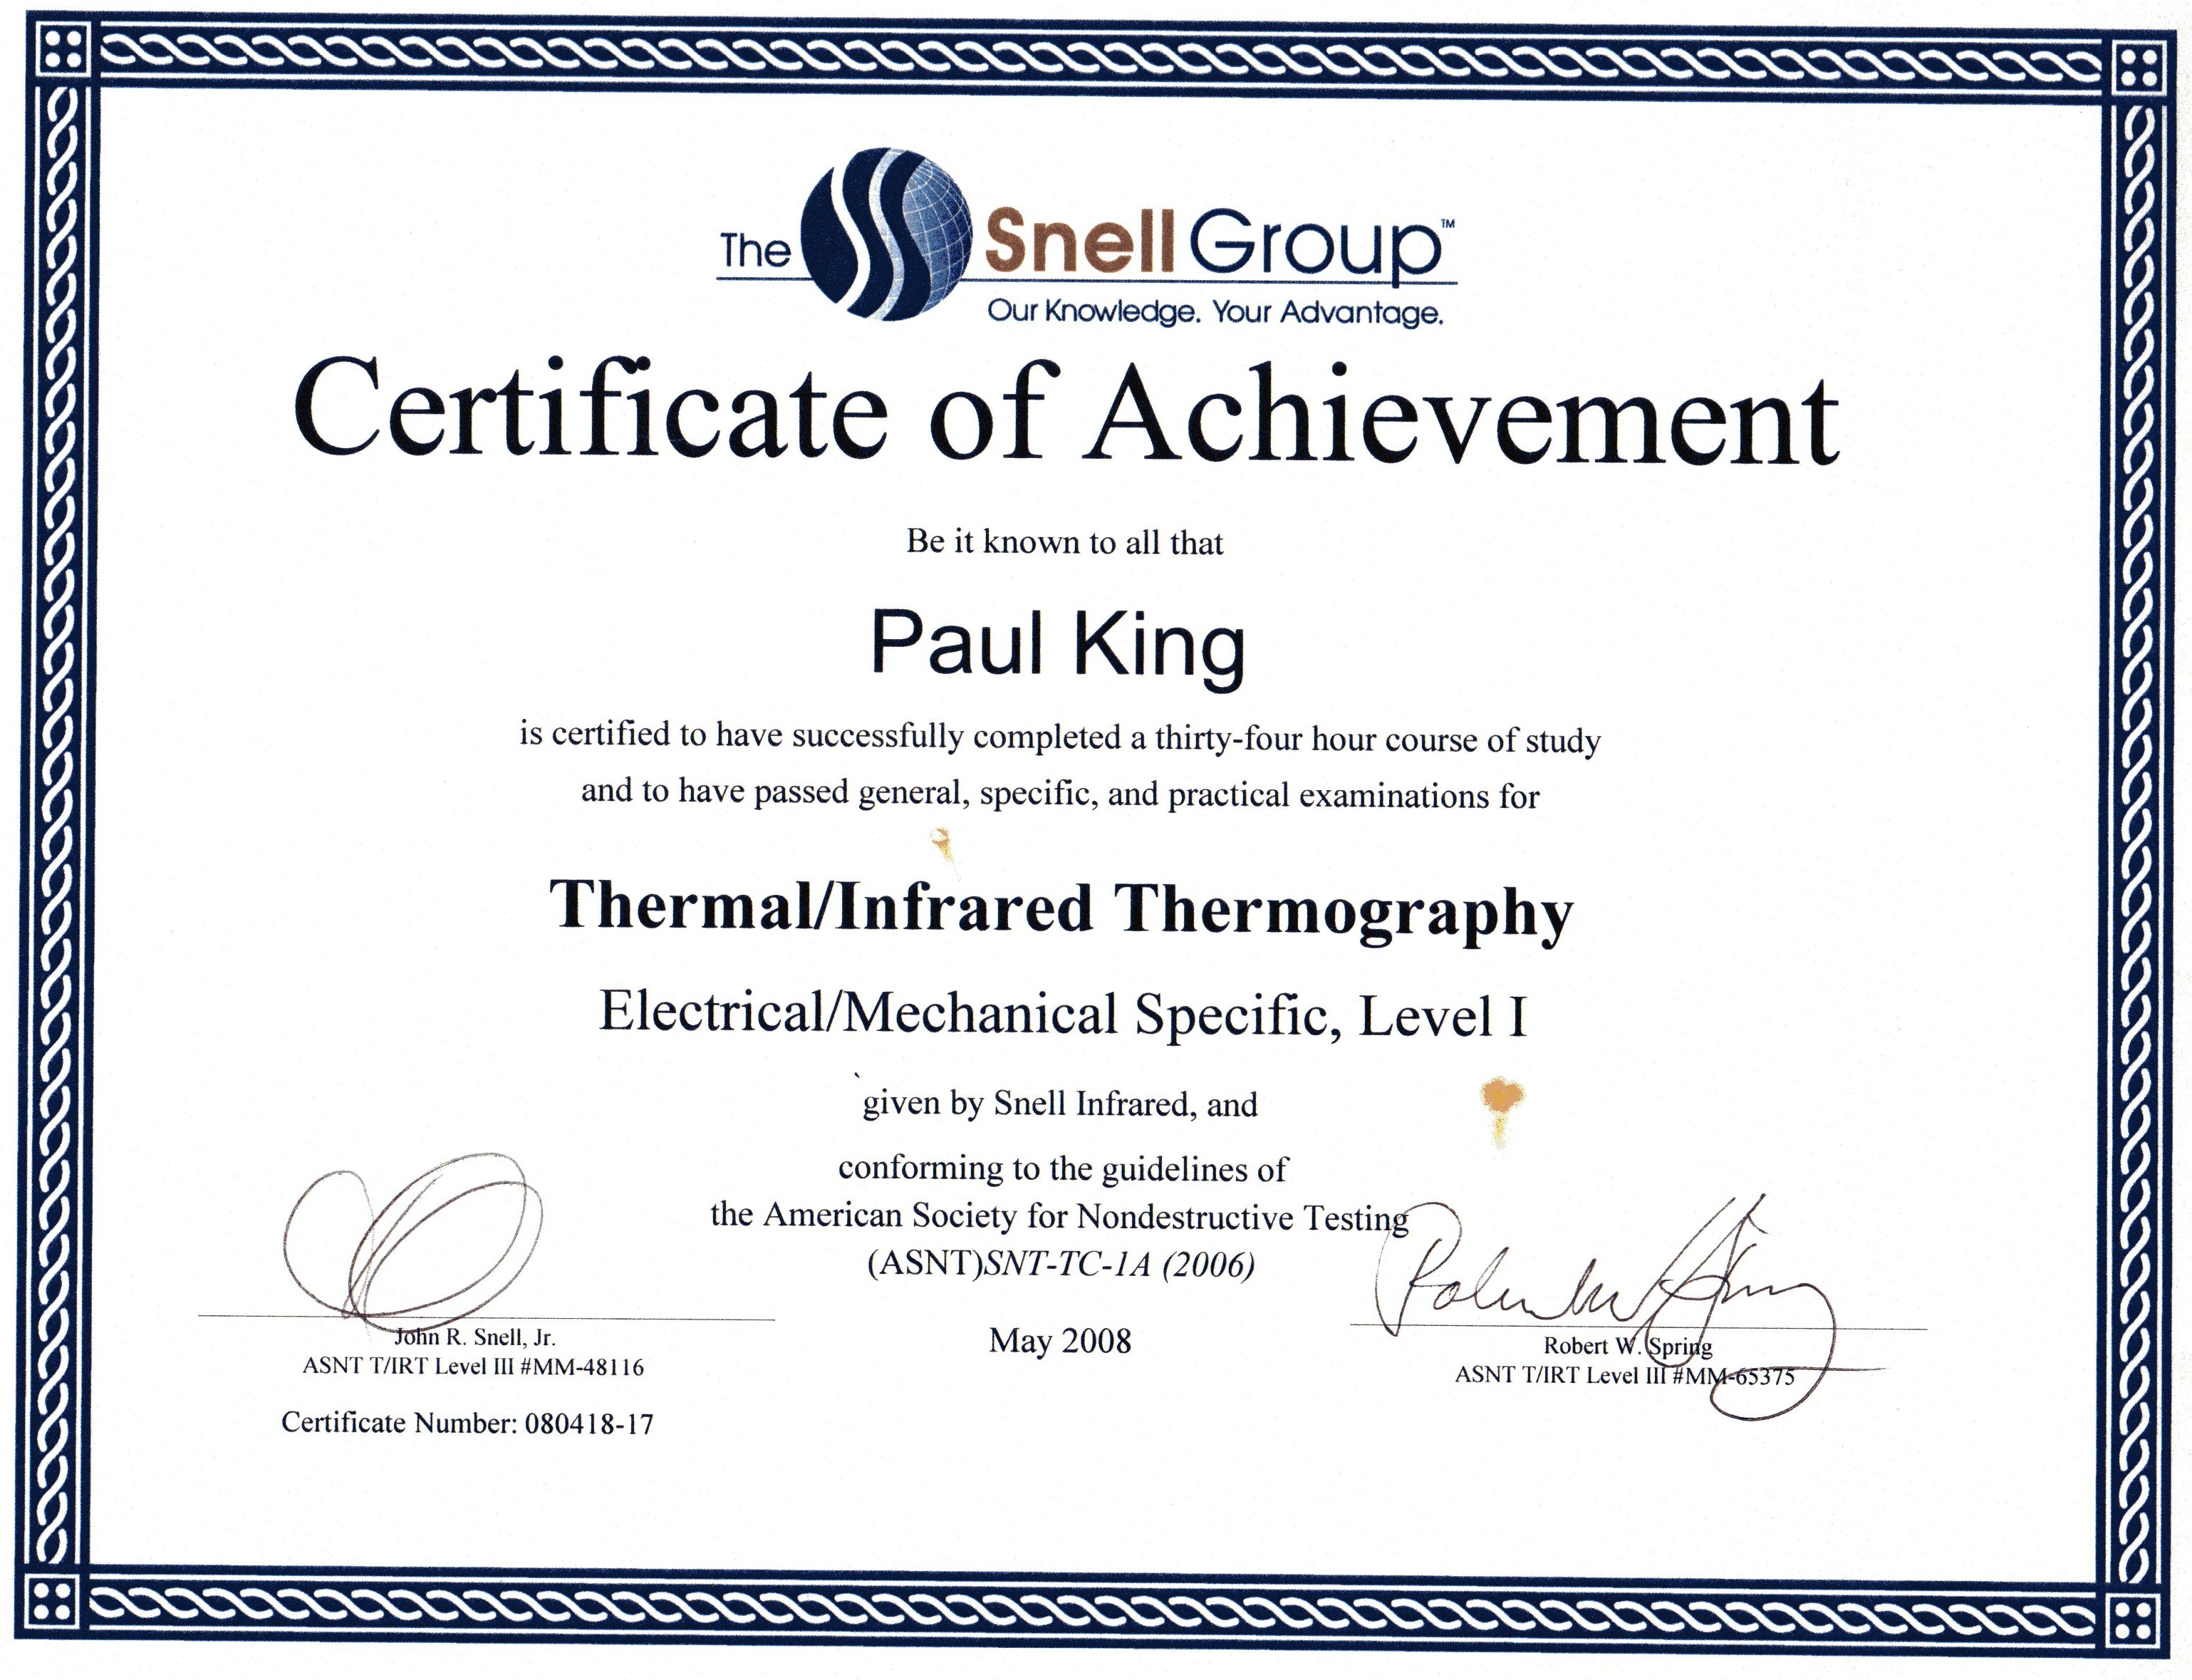 ASNT-Level-1-Electrical-Mechanical-Thermographer.jpg